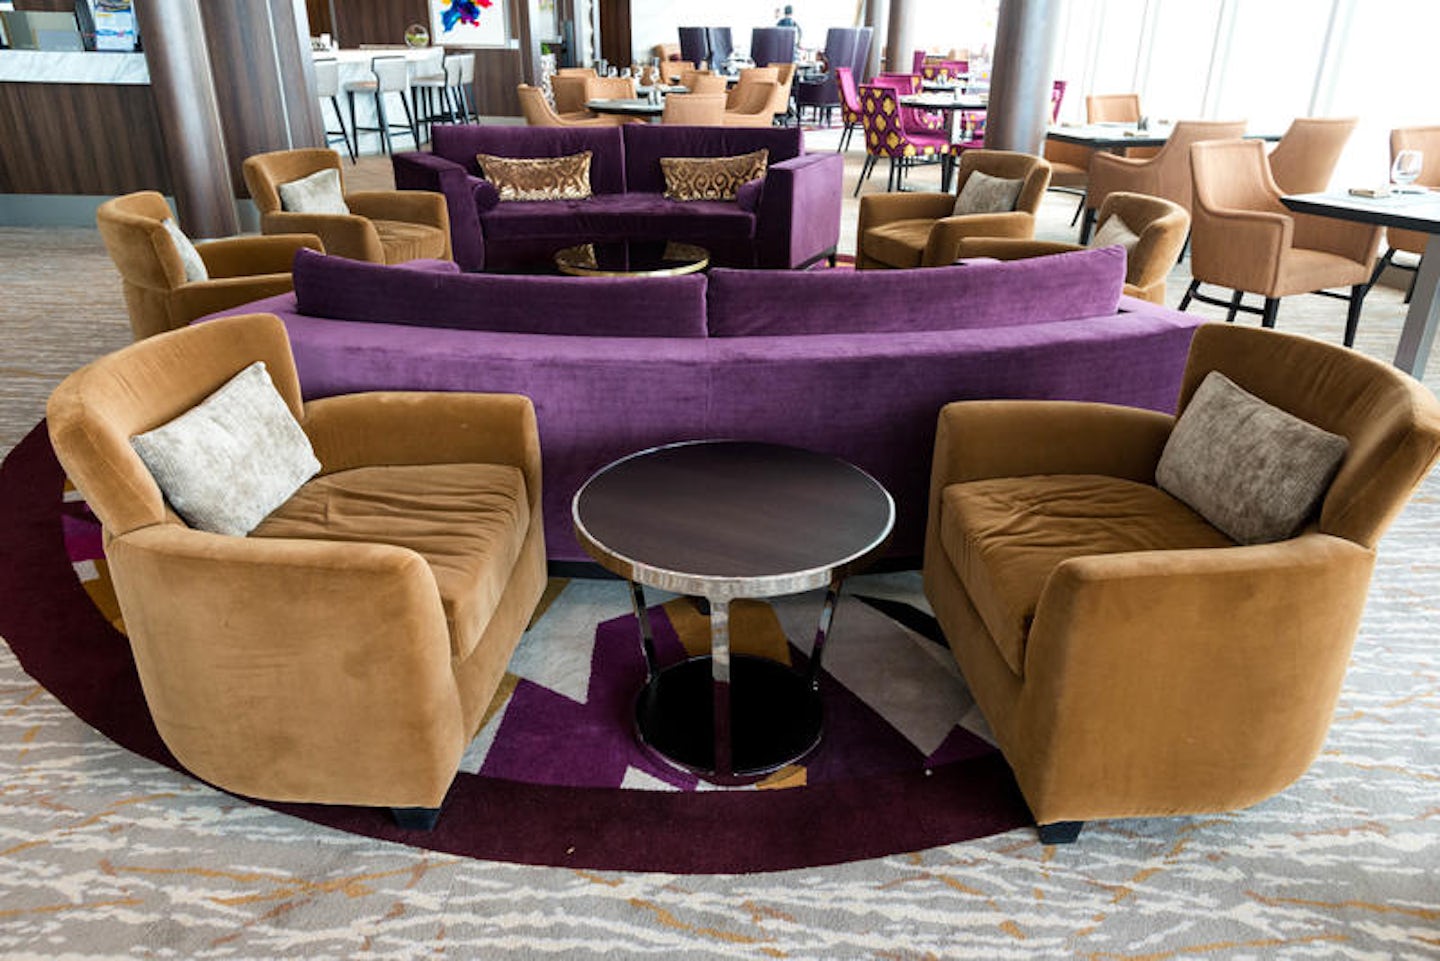 Suite Lounge & Bar on Symphony of the Seas